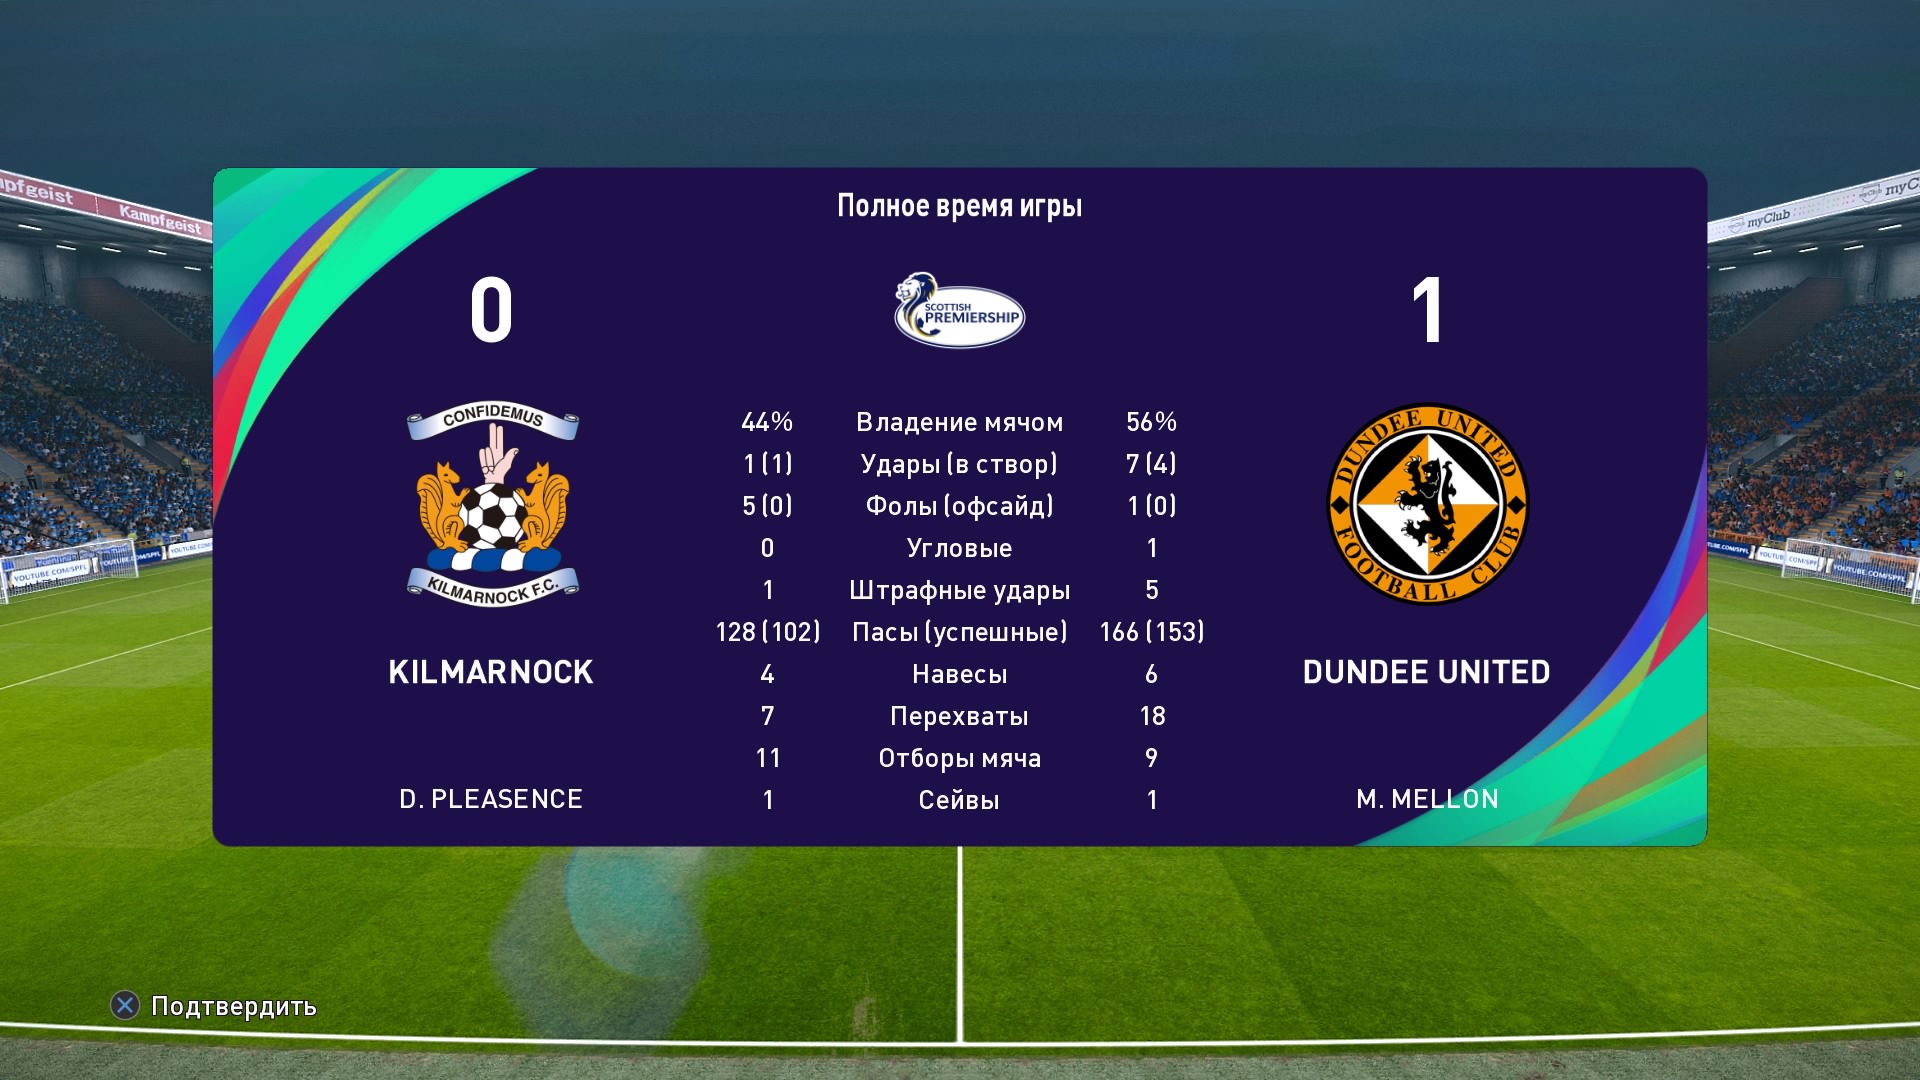 Ross county v kilmarnock betting preview goal stock picking tools of modern investing in real estate